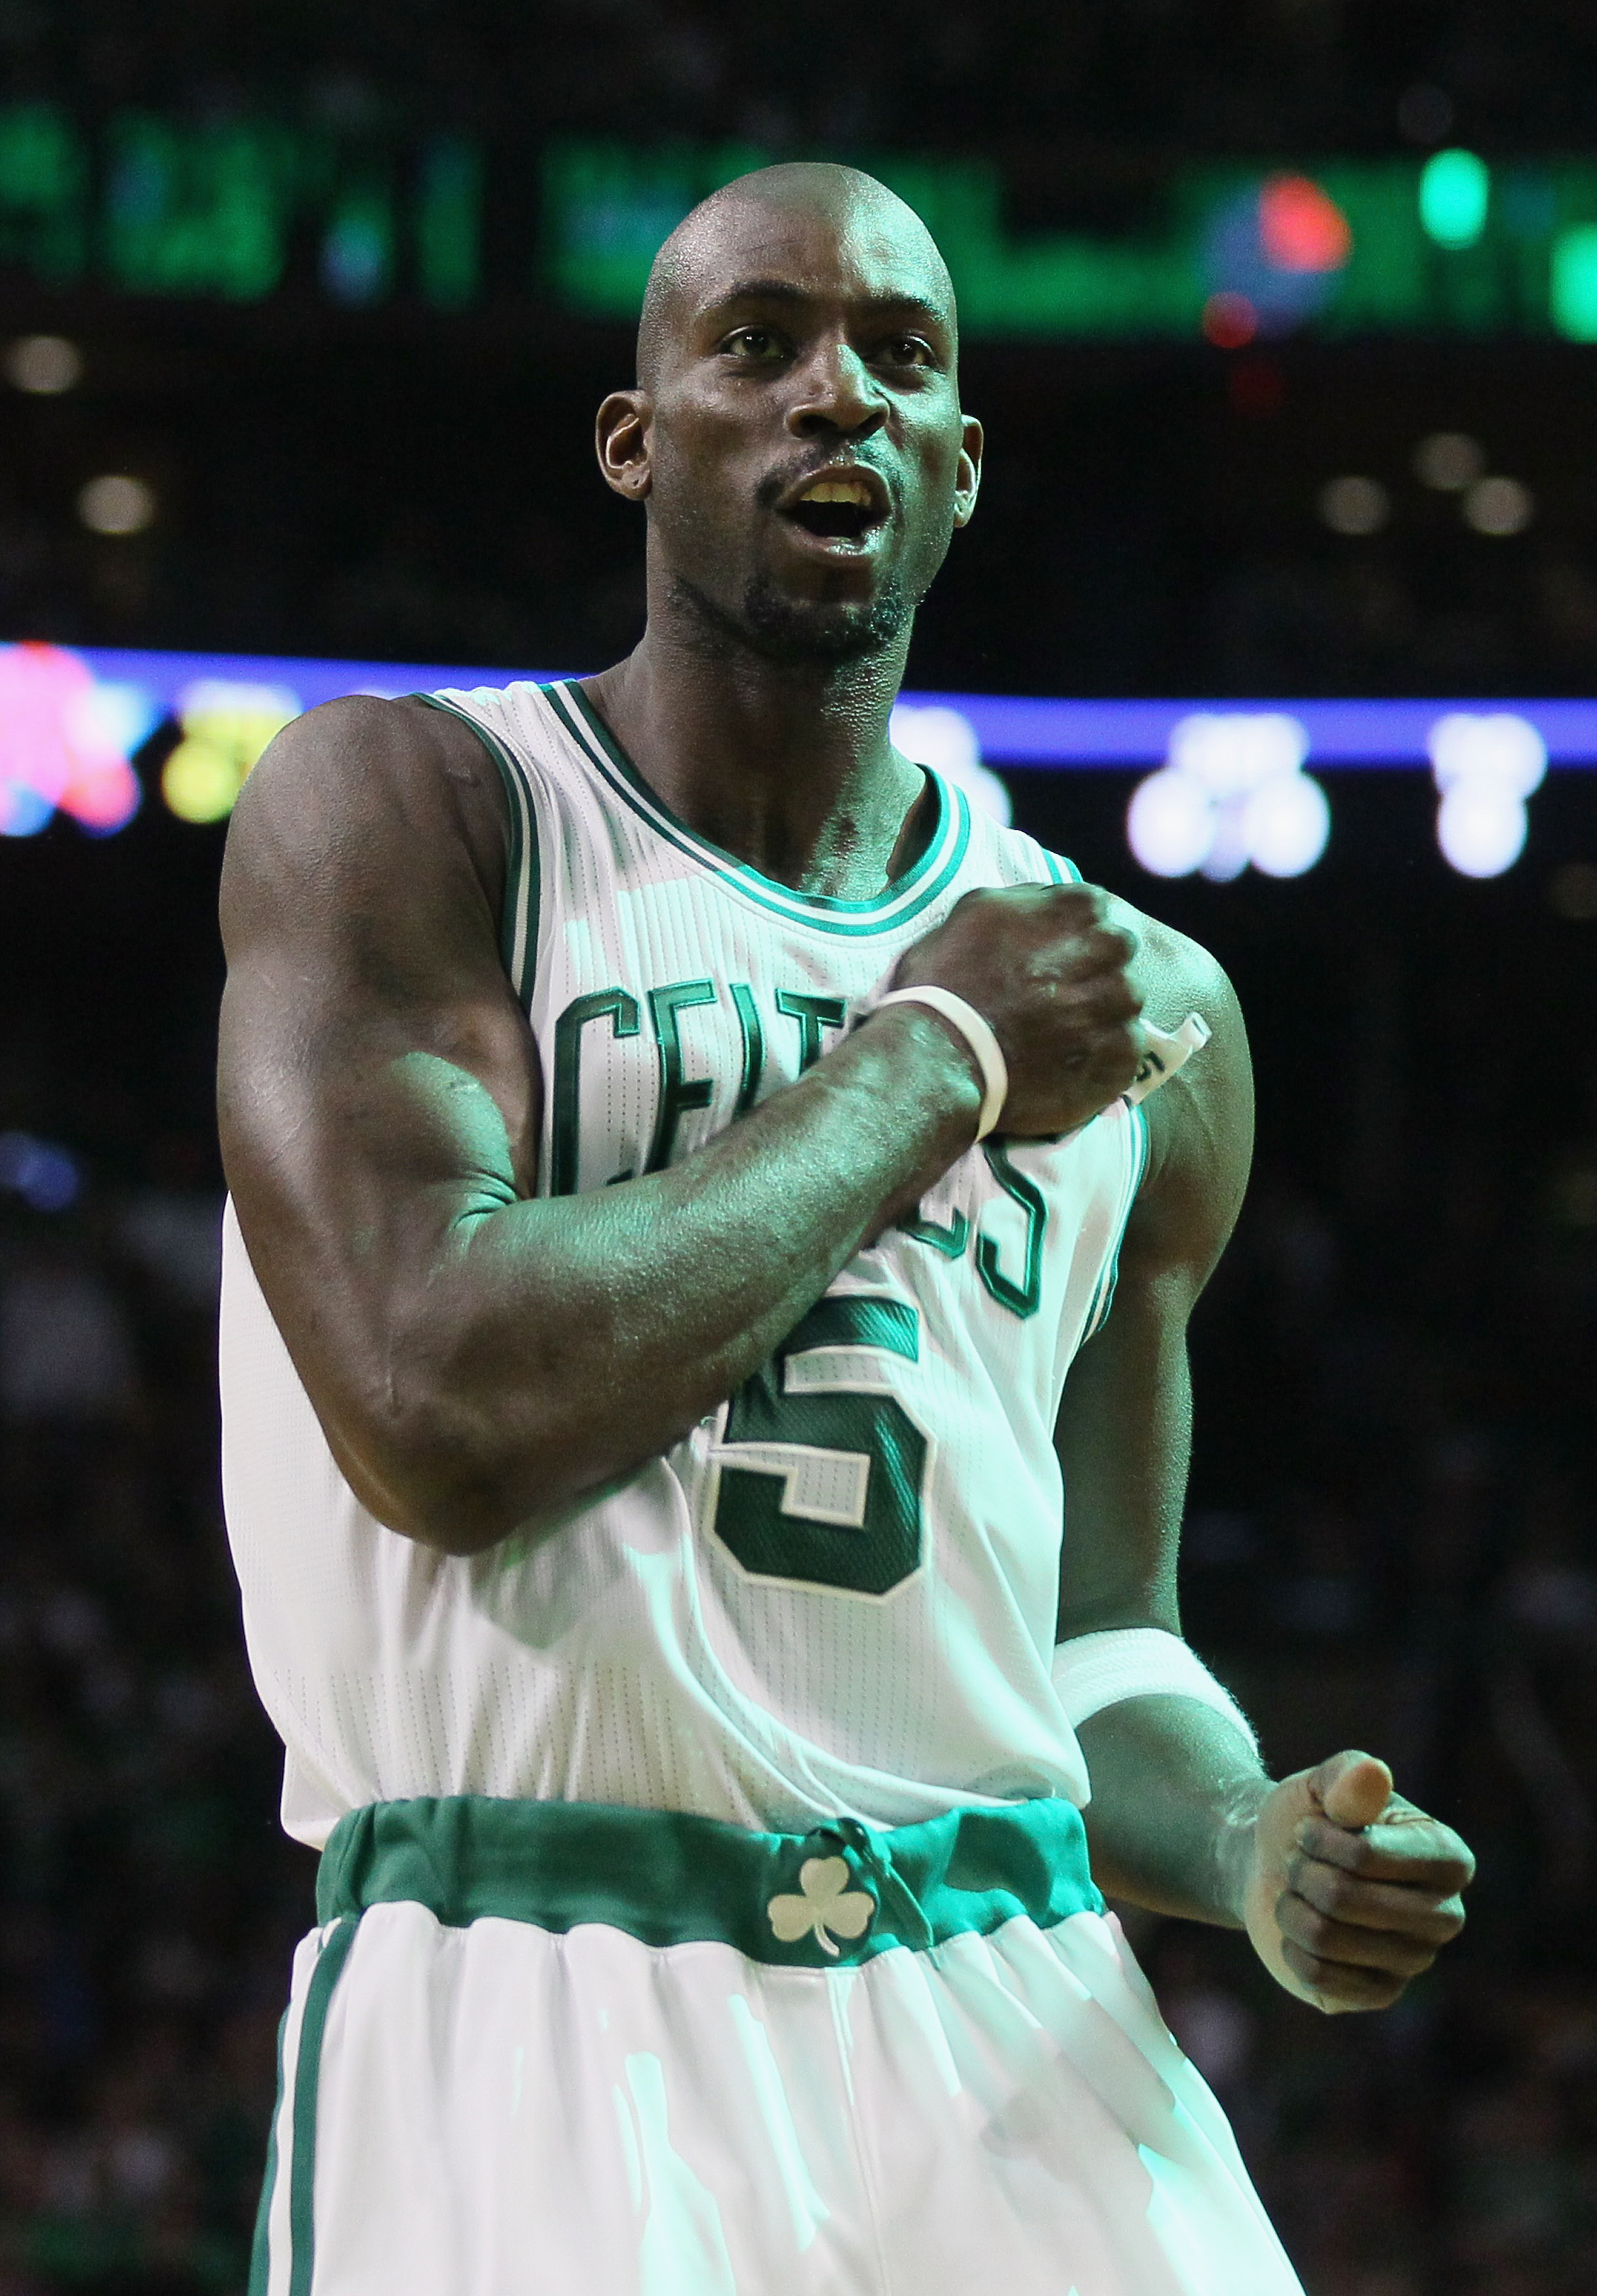 BOSTON, MA - APRIL 17:  Kevin Garnett #5 of the Boston Celtics rallies the fans before the opening tipoff against the New York Knicks  in Game One of the Eastern Conference Quarterfinals in the 2011 NBA Playoffs on April 17, 2011 at the TD Garden in Bosto